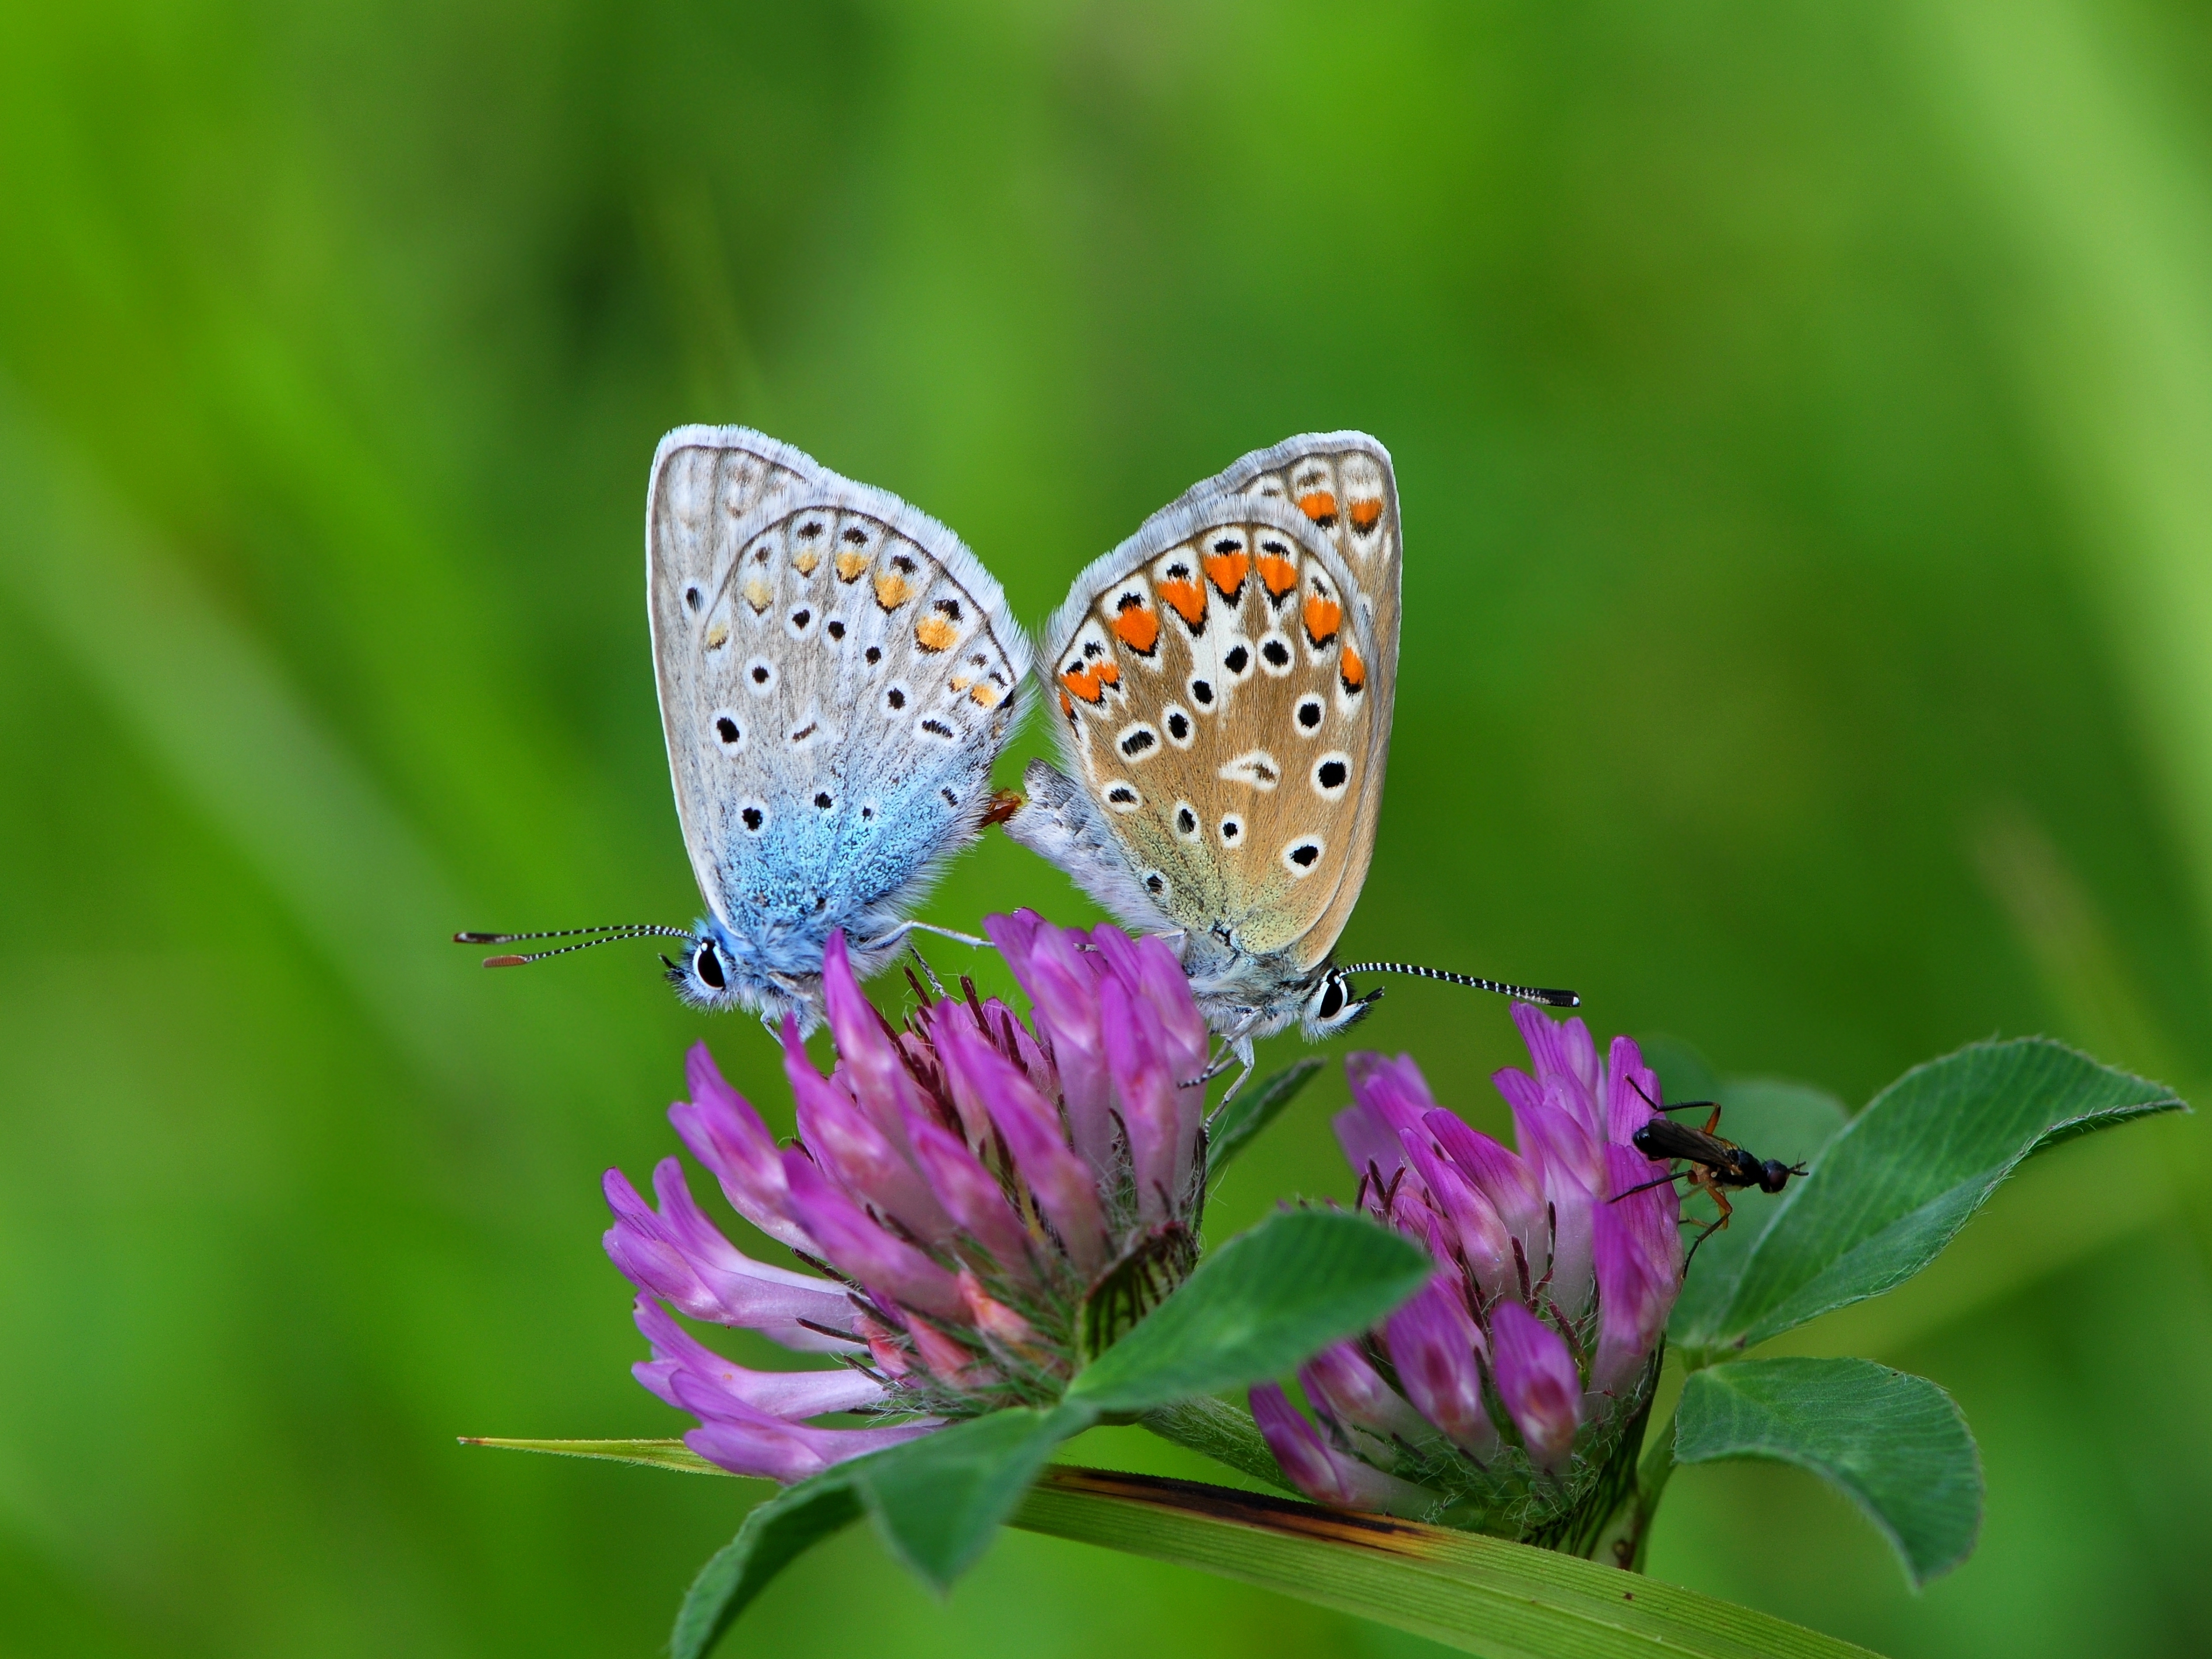 Two bright blue butterflies with spots and some small, reddish-orange details on the wings, stand backend-to-backend, mating. They are on a purple clover blossom, and the background is a rich green color.